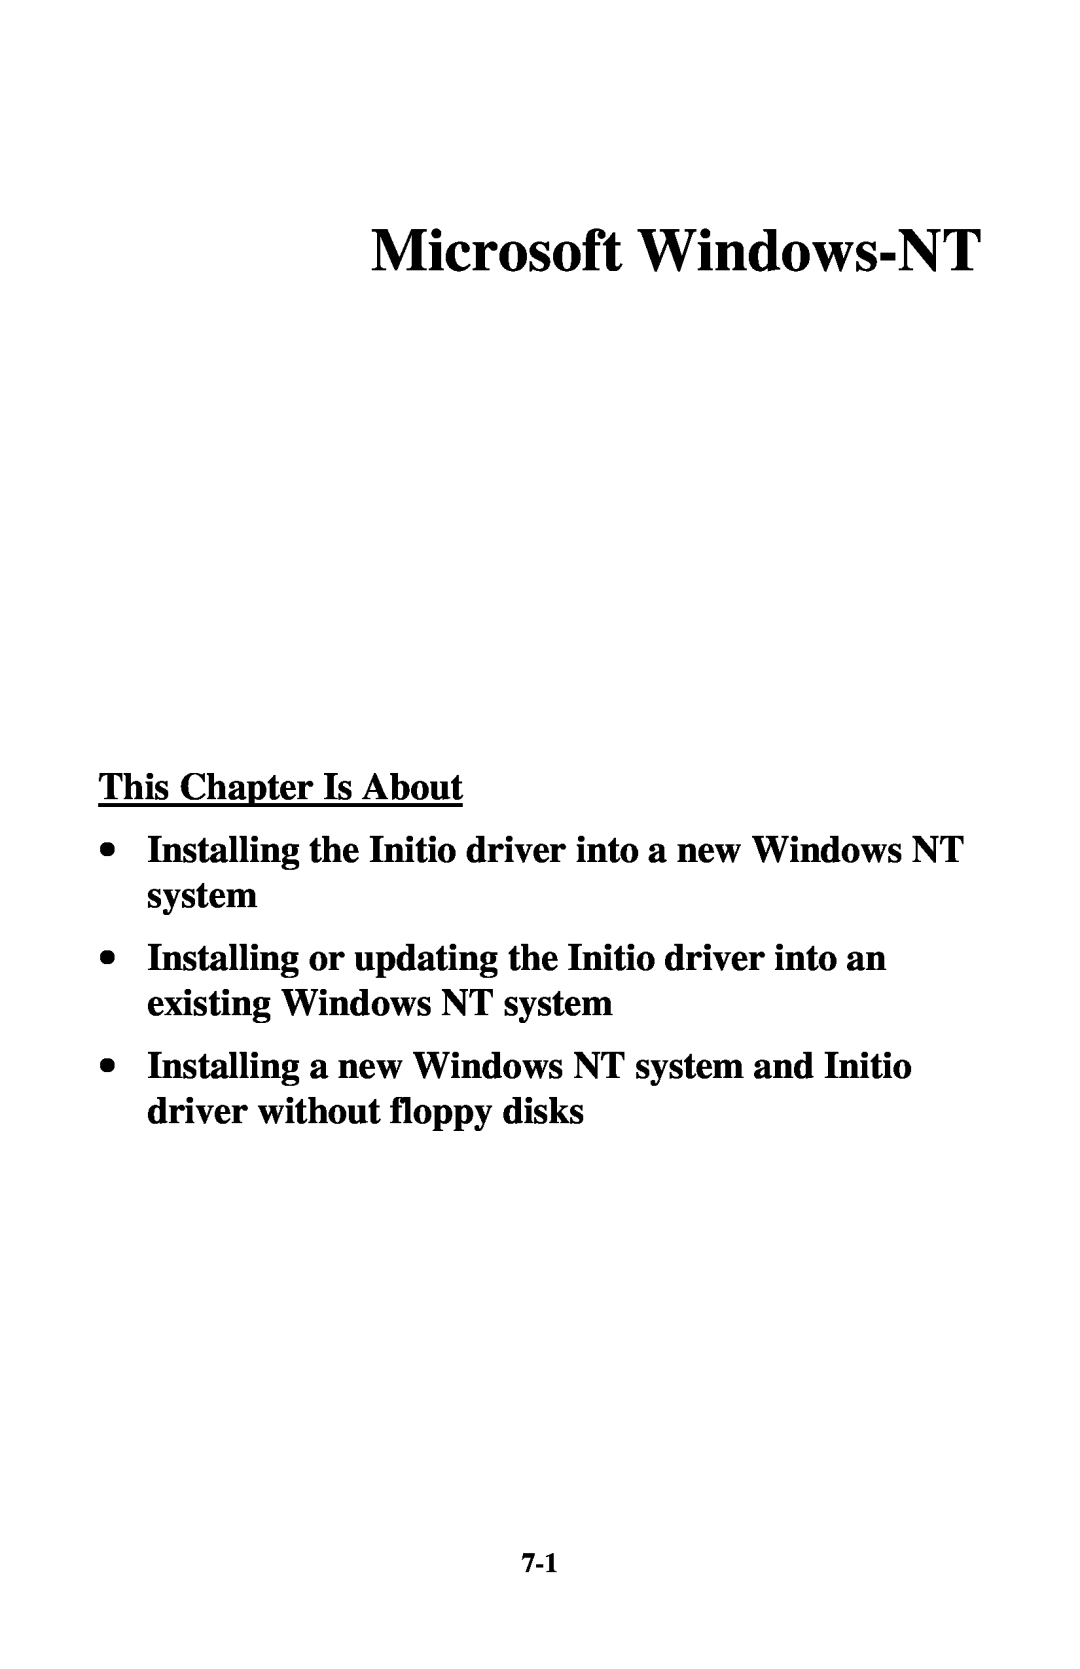 Initio INI-9100U Microsoft Windows-NT, ∙ Installing the Initio driver into a new Windows NT system, This Chapter Is About 